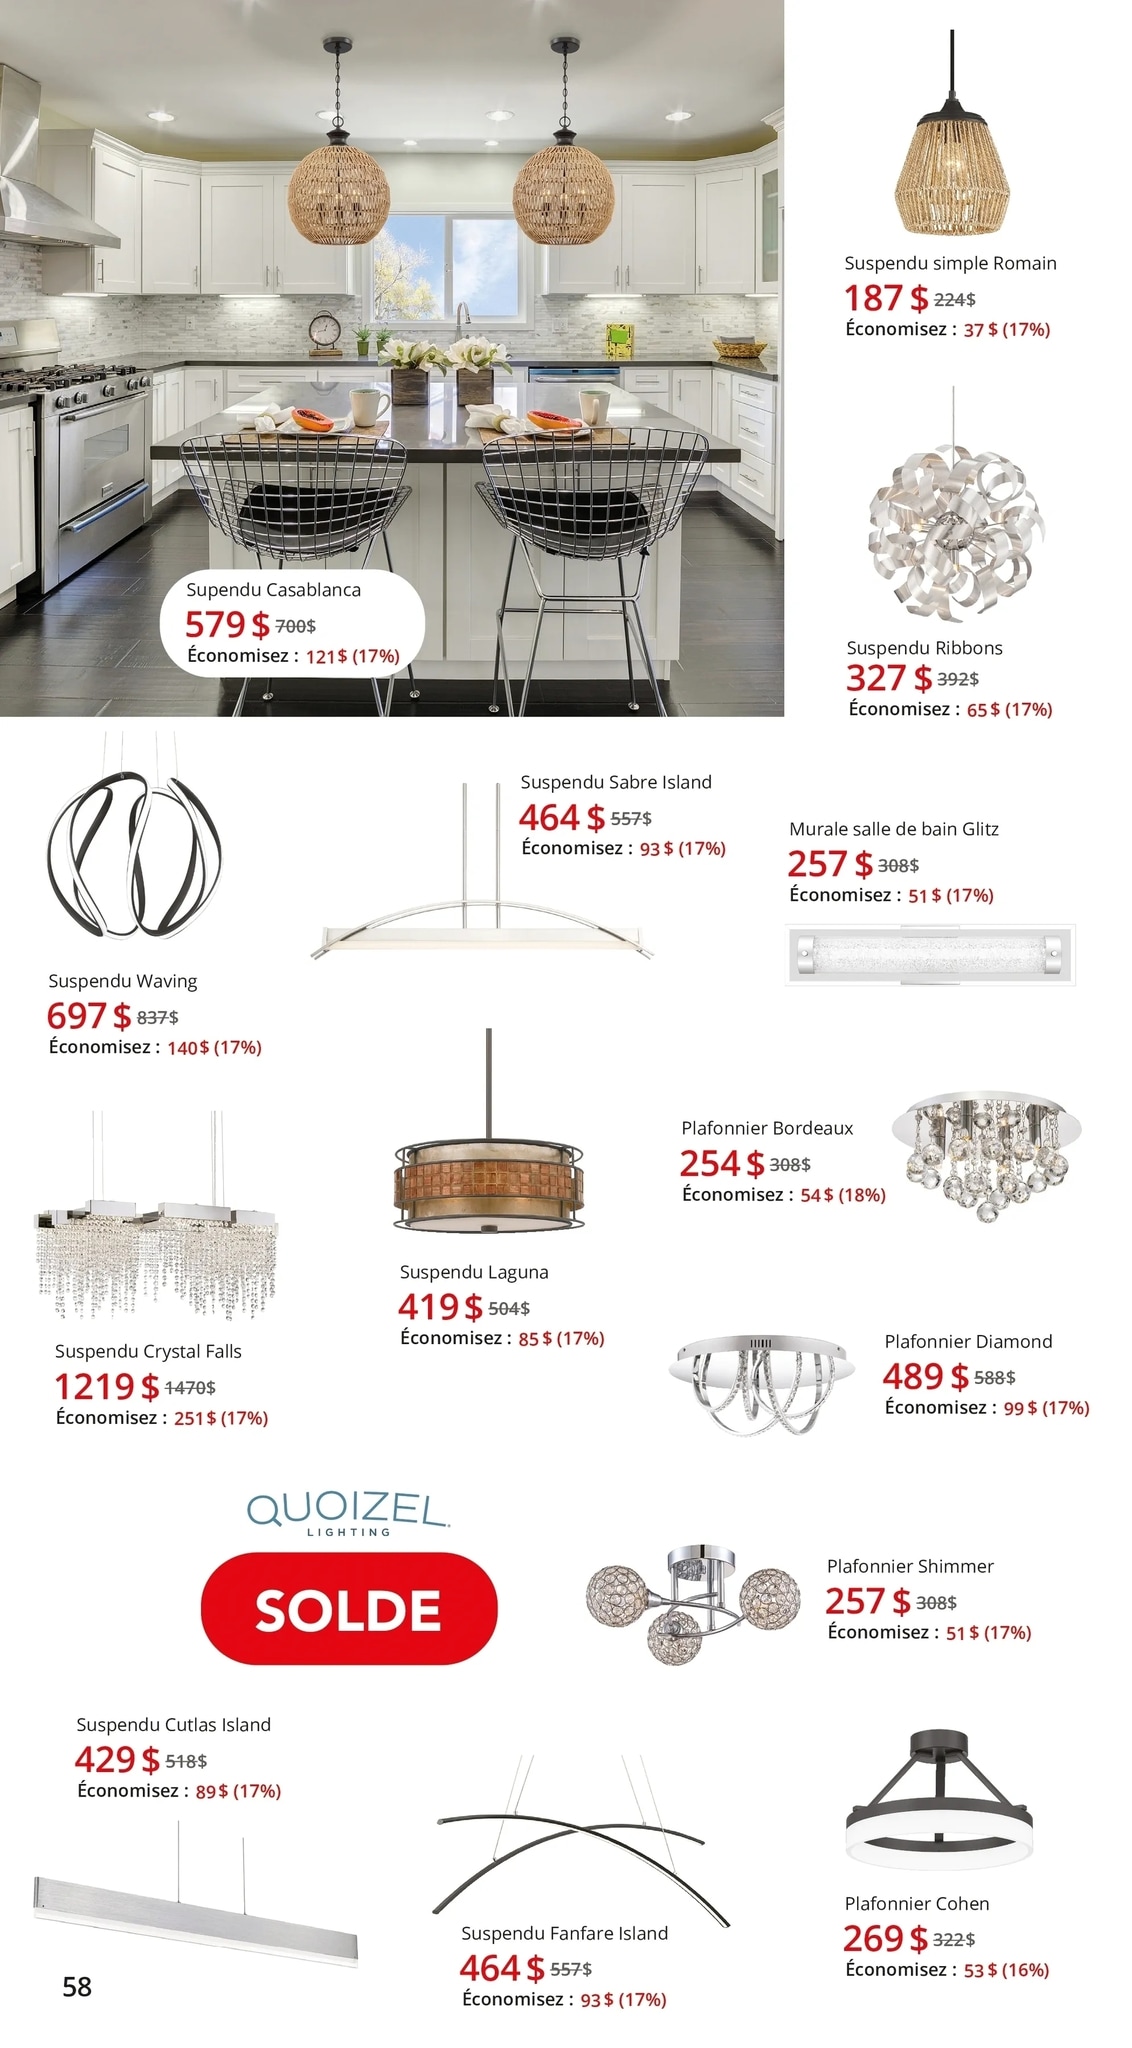 Circulaire Multi Luminaire - Page 58